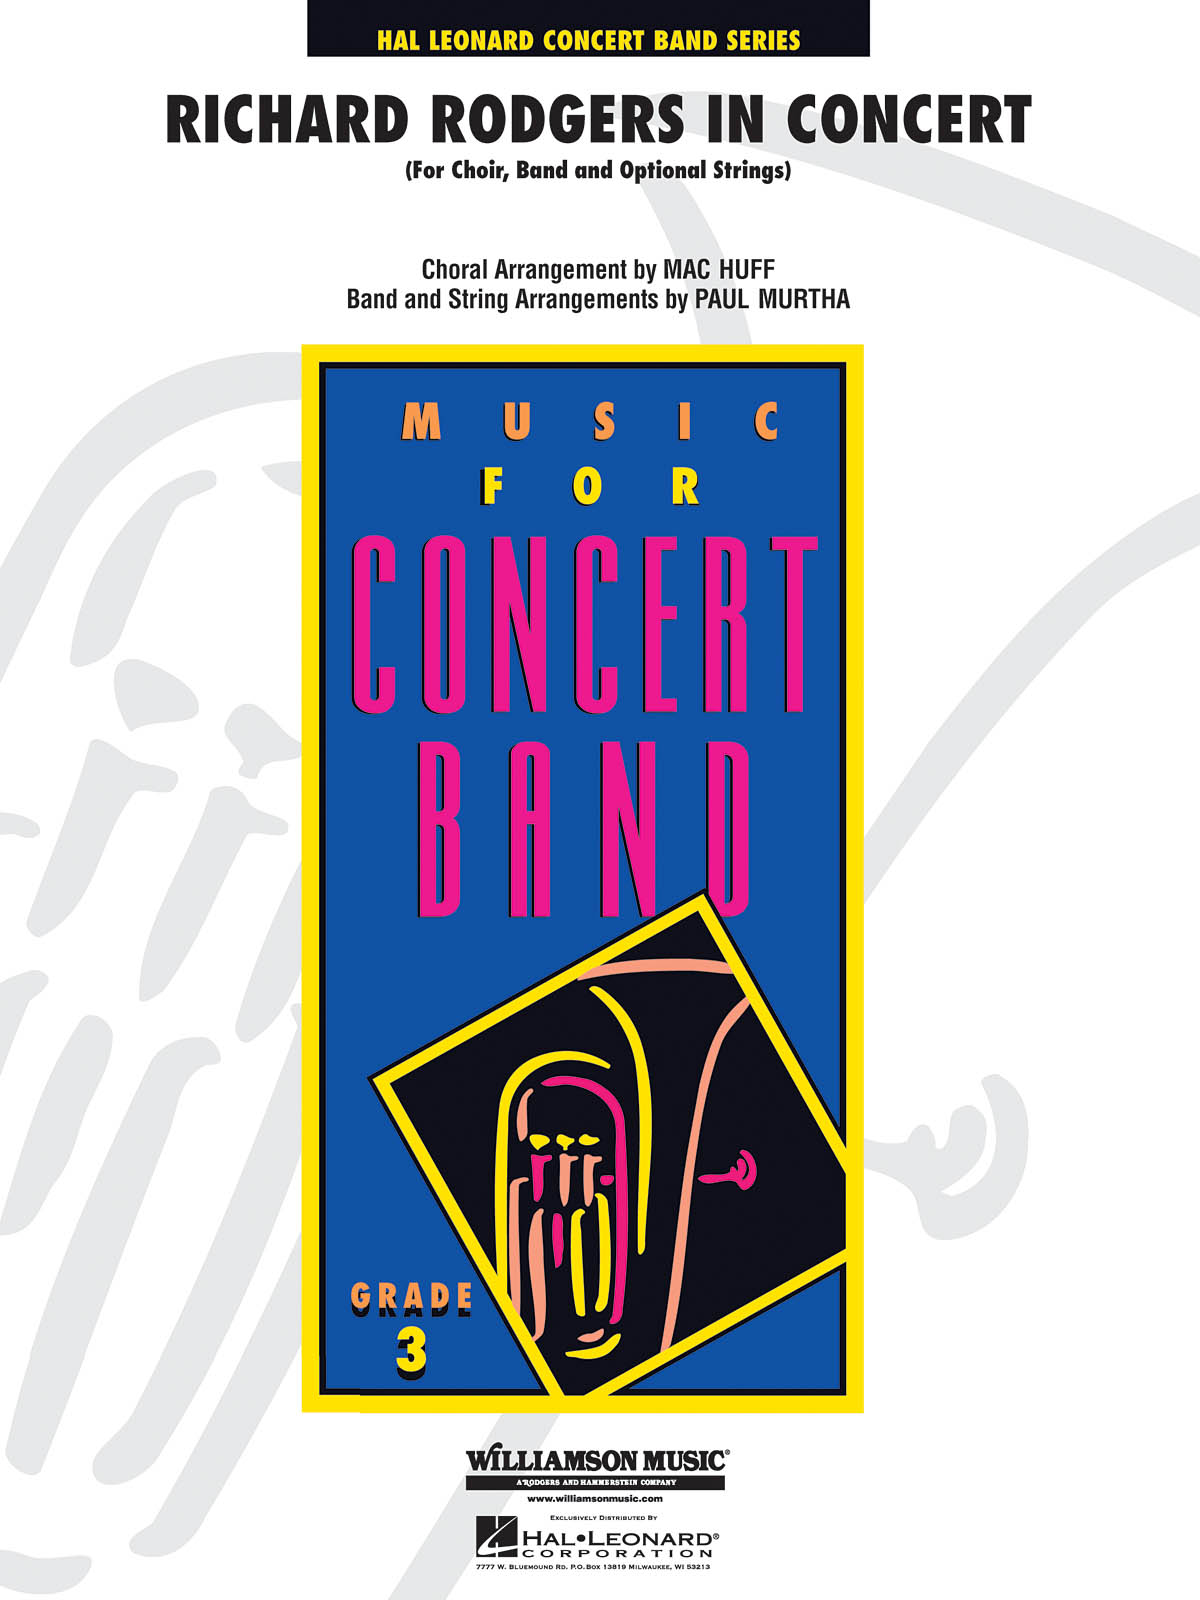 Richard Rodgers in Concert: Concert Band: Score